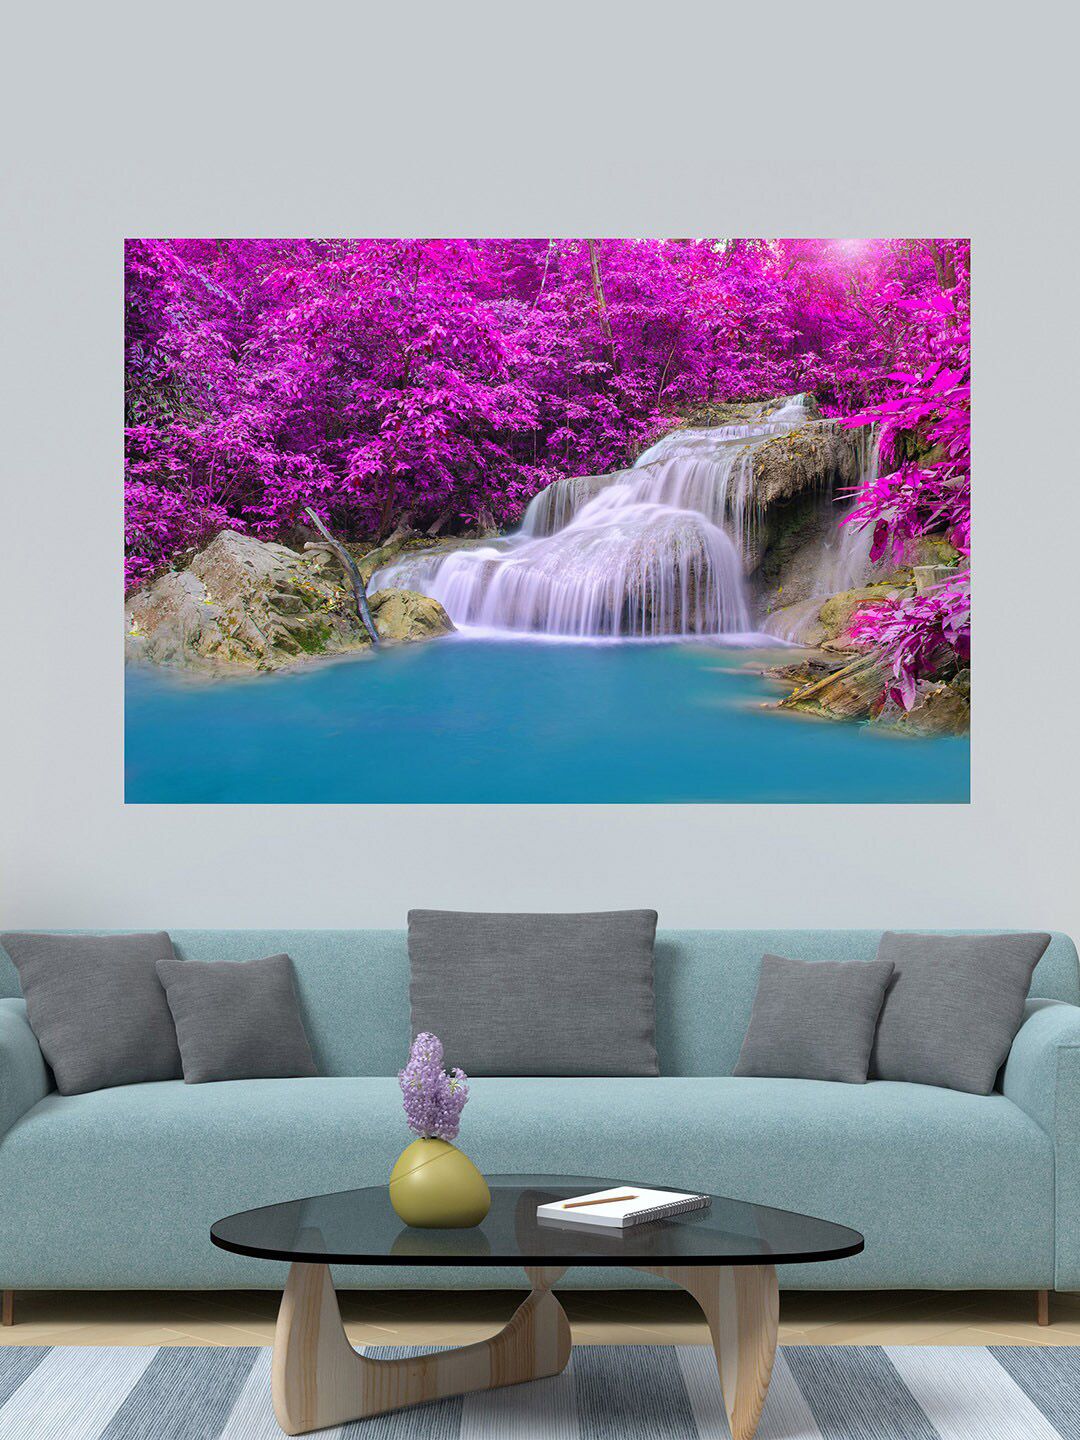 WENS Multicoloured Peaceful Nature Printed Vinyl Wall Sticker Price in India